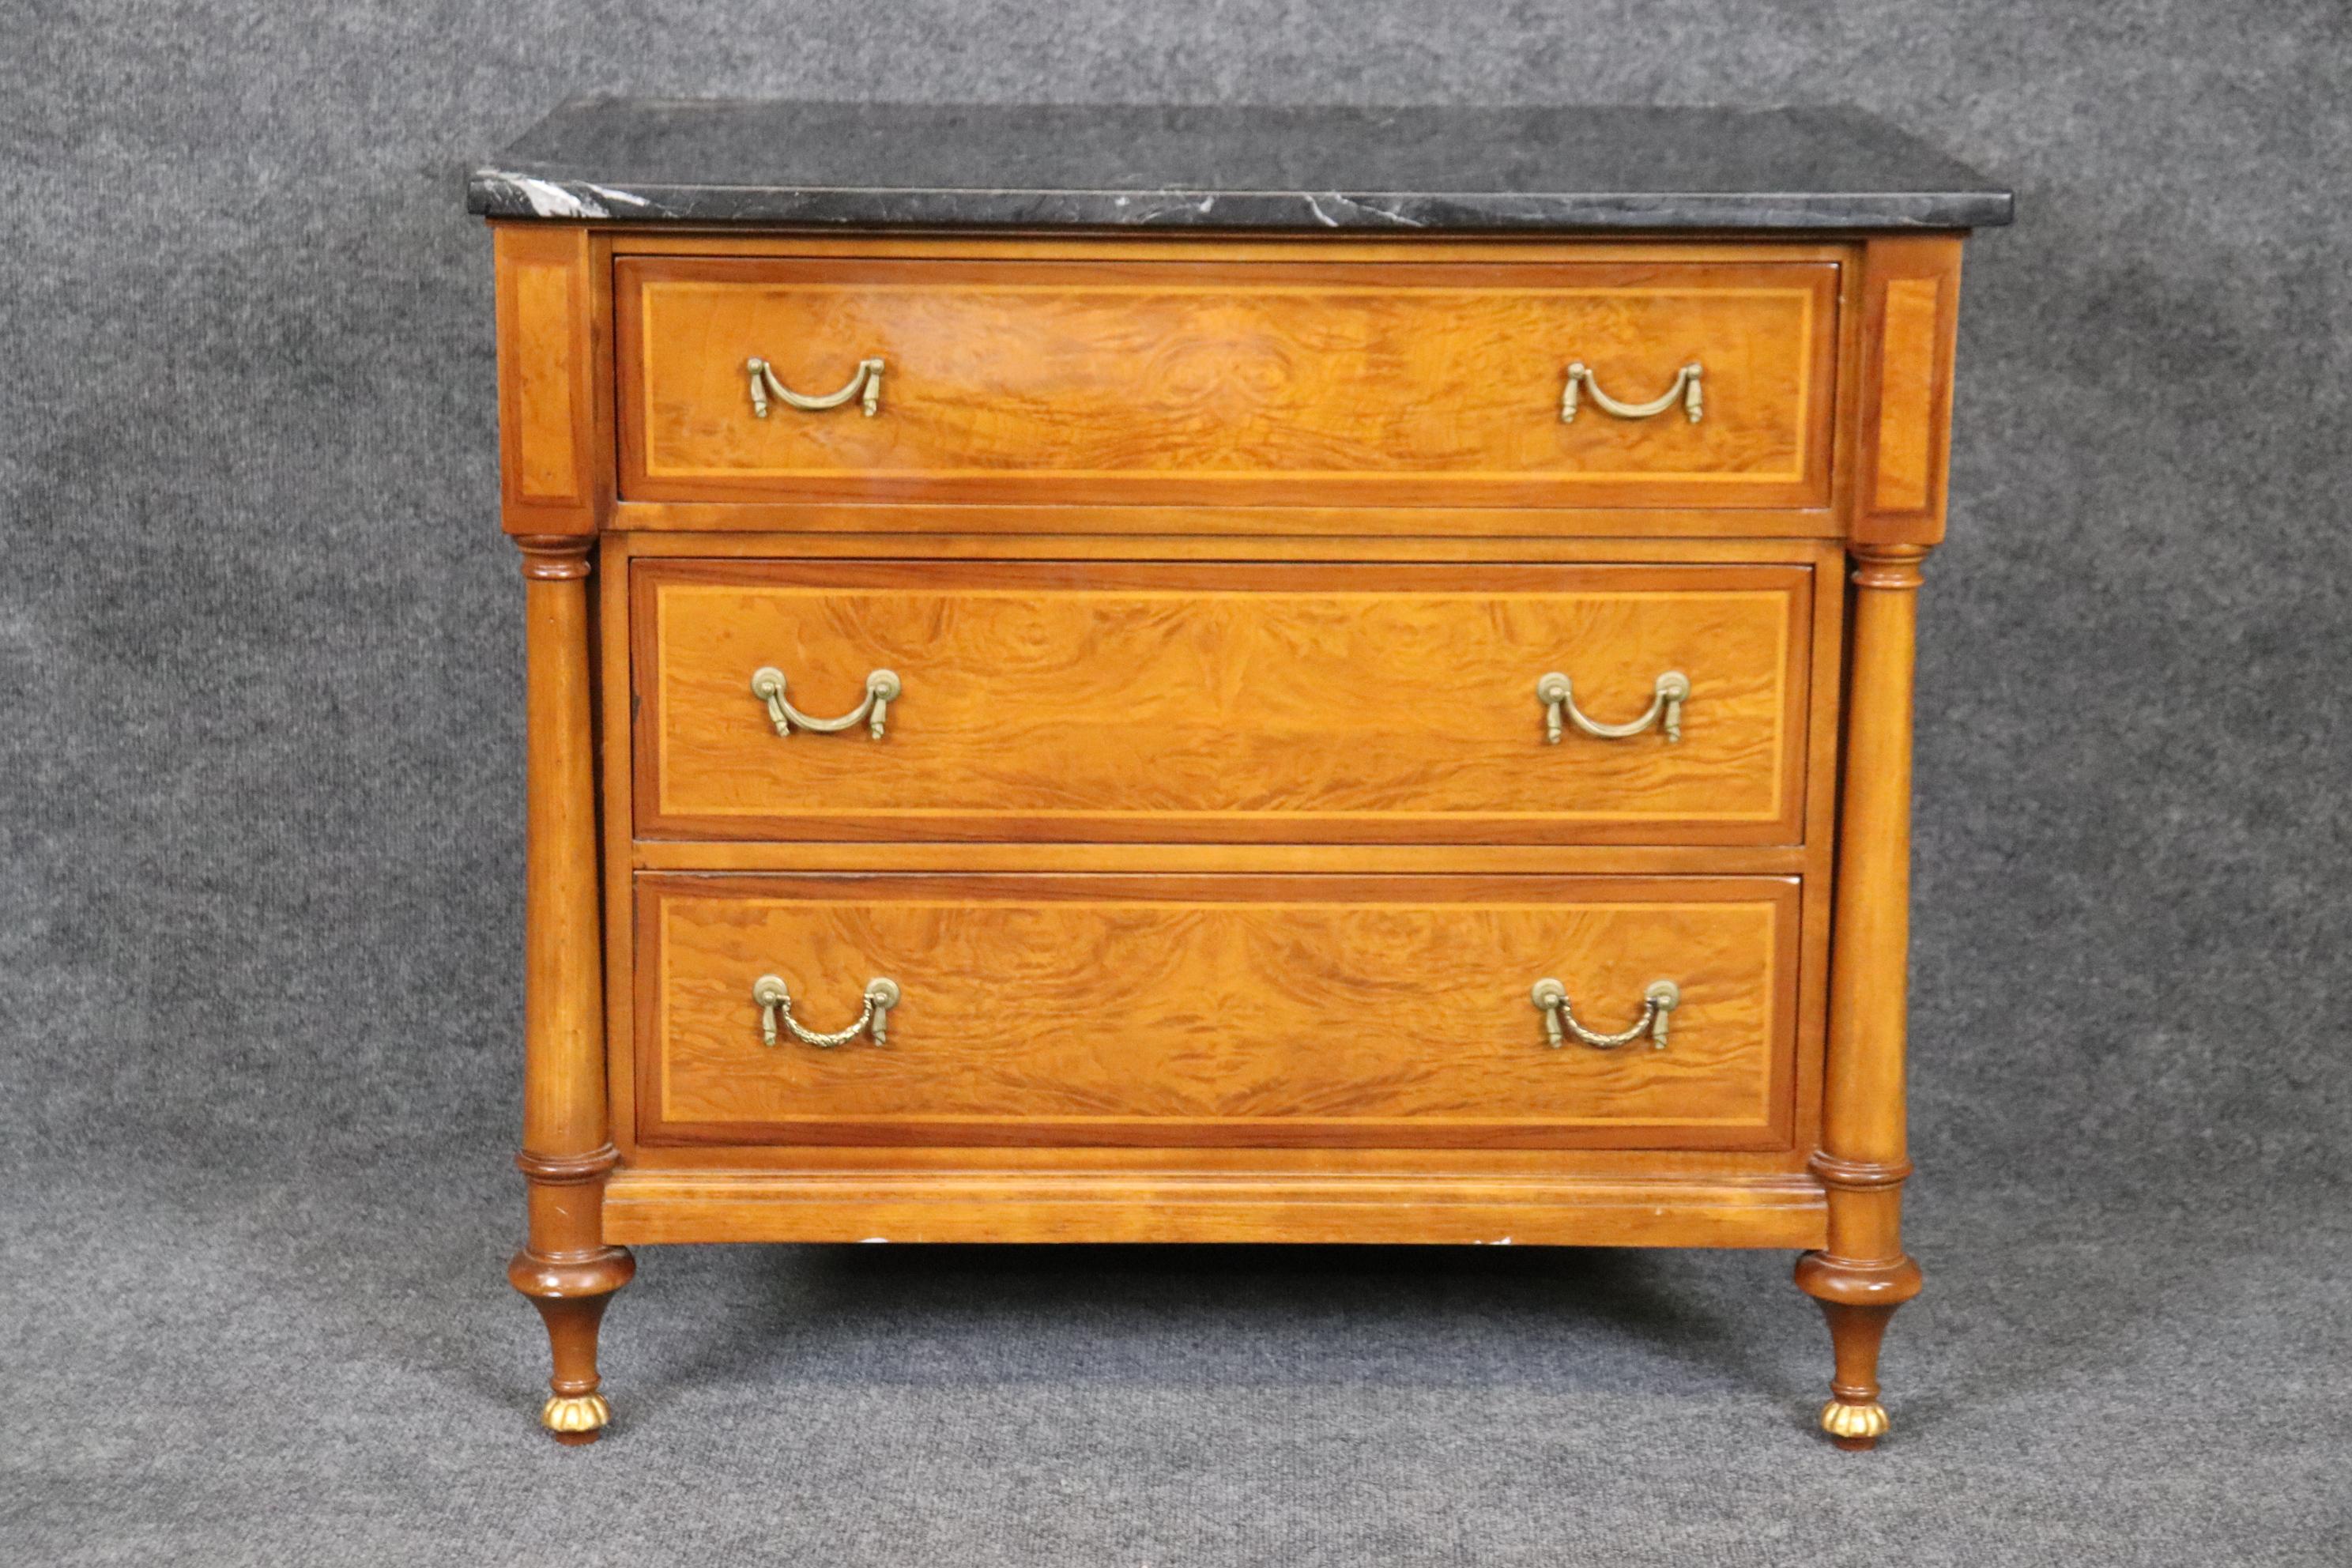 This is a gorgeous solid cherry, fully dove-tailed marble top nightstand. The piece is in good vintage condition and has no significant signs of age or damage to mention. Measures 32 wide x 28.5 tall x 20 deep. Dates to the 1990s era. 